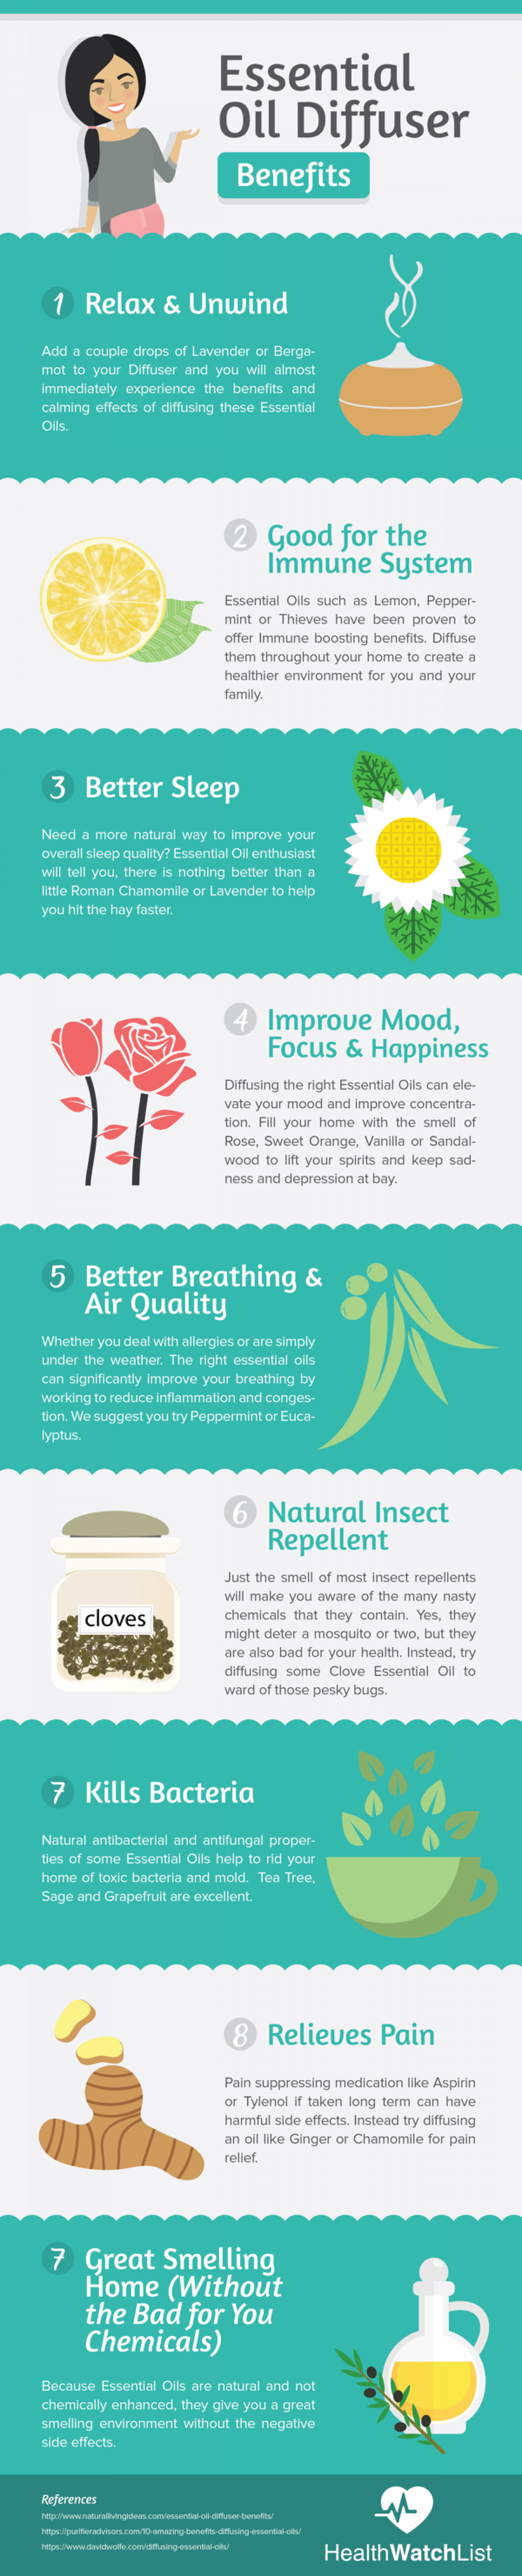 Oil Diffuser Benefits Infographic